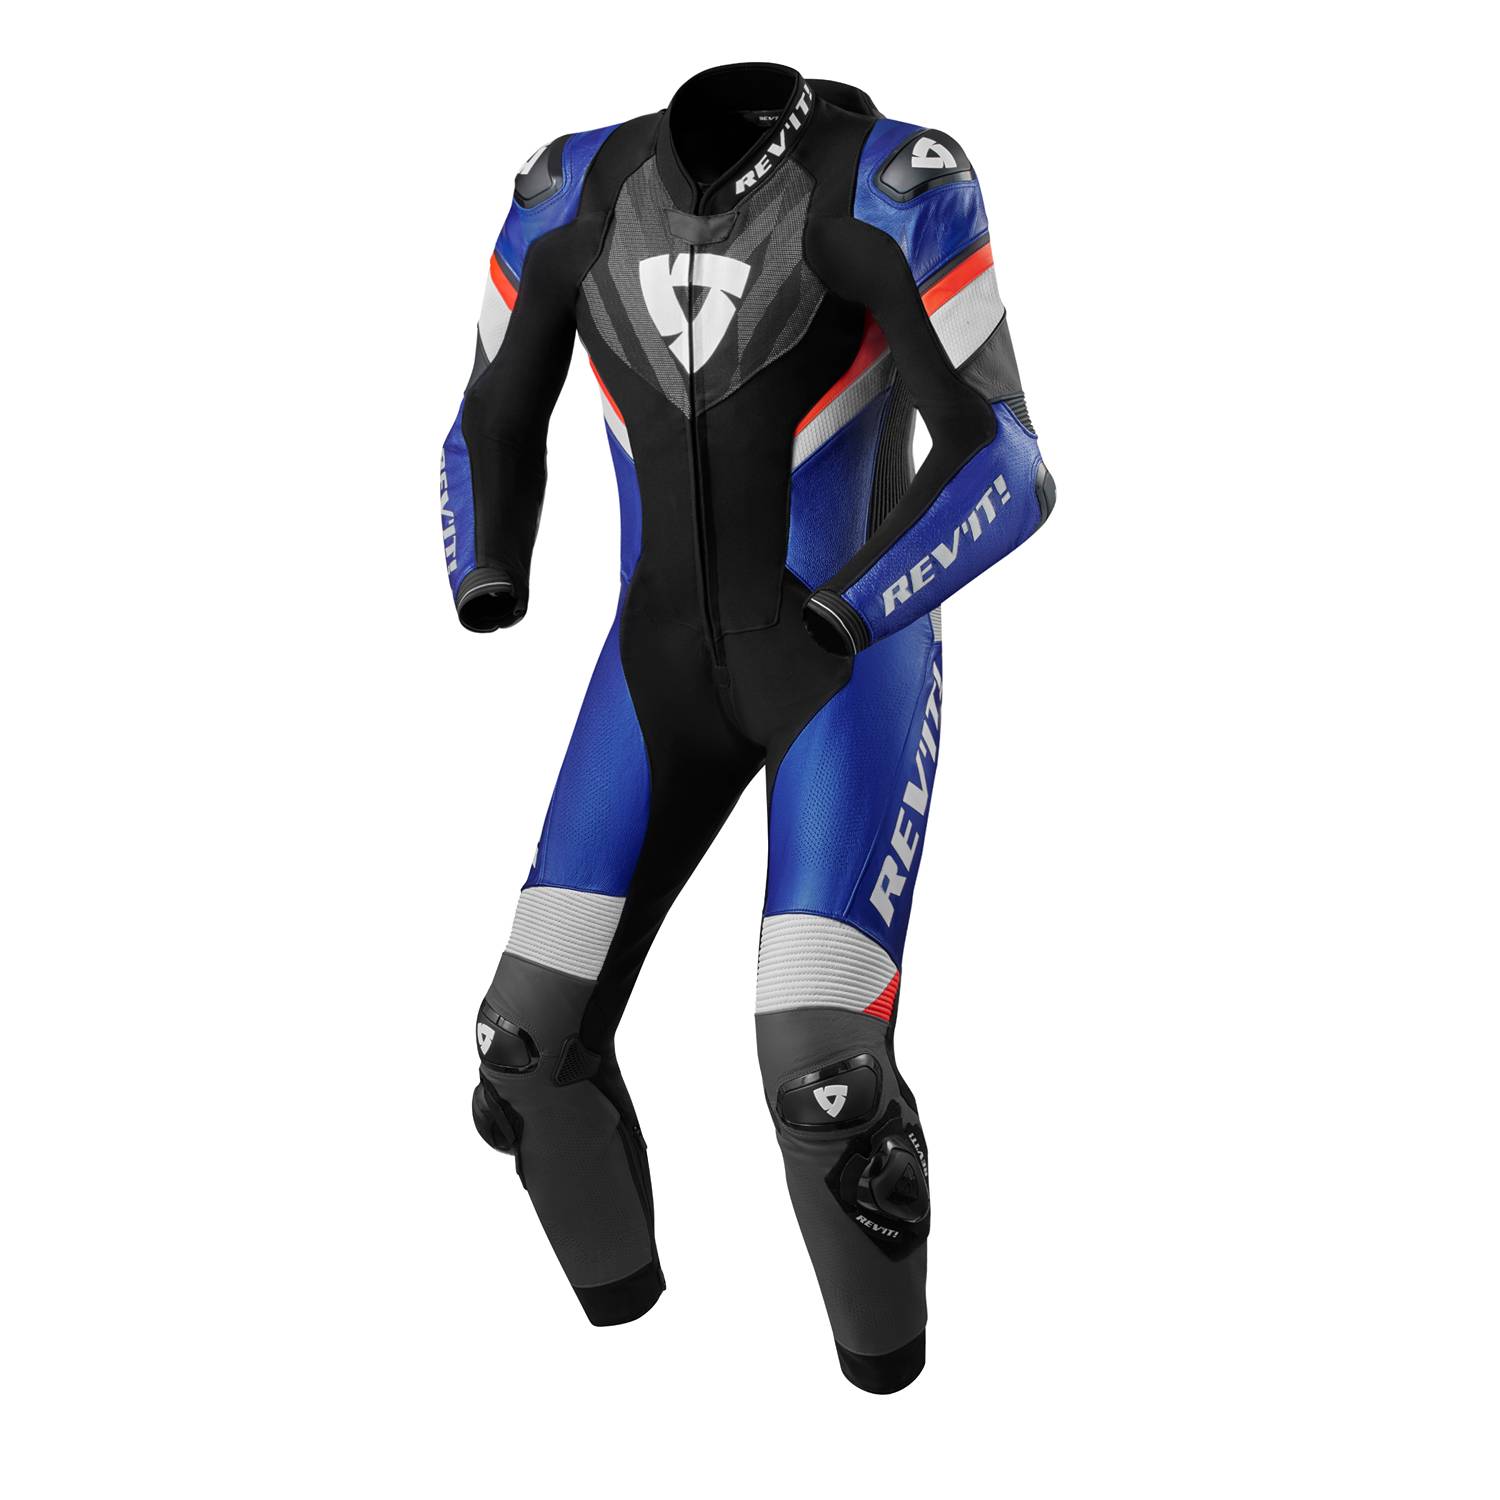 Image of REV'IT! Hyperspeed 2 One Piece Suit Black Blue Size 52 ID 8700001359740